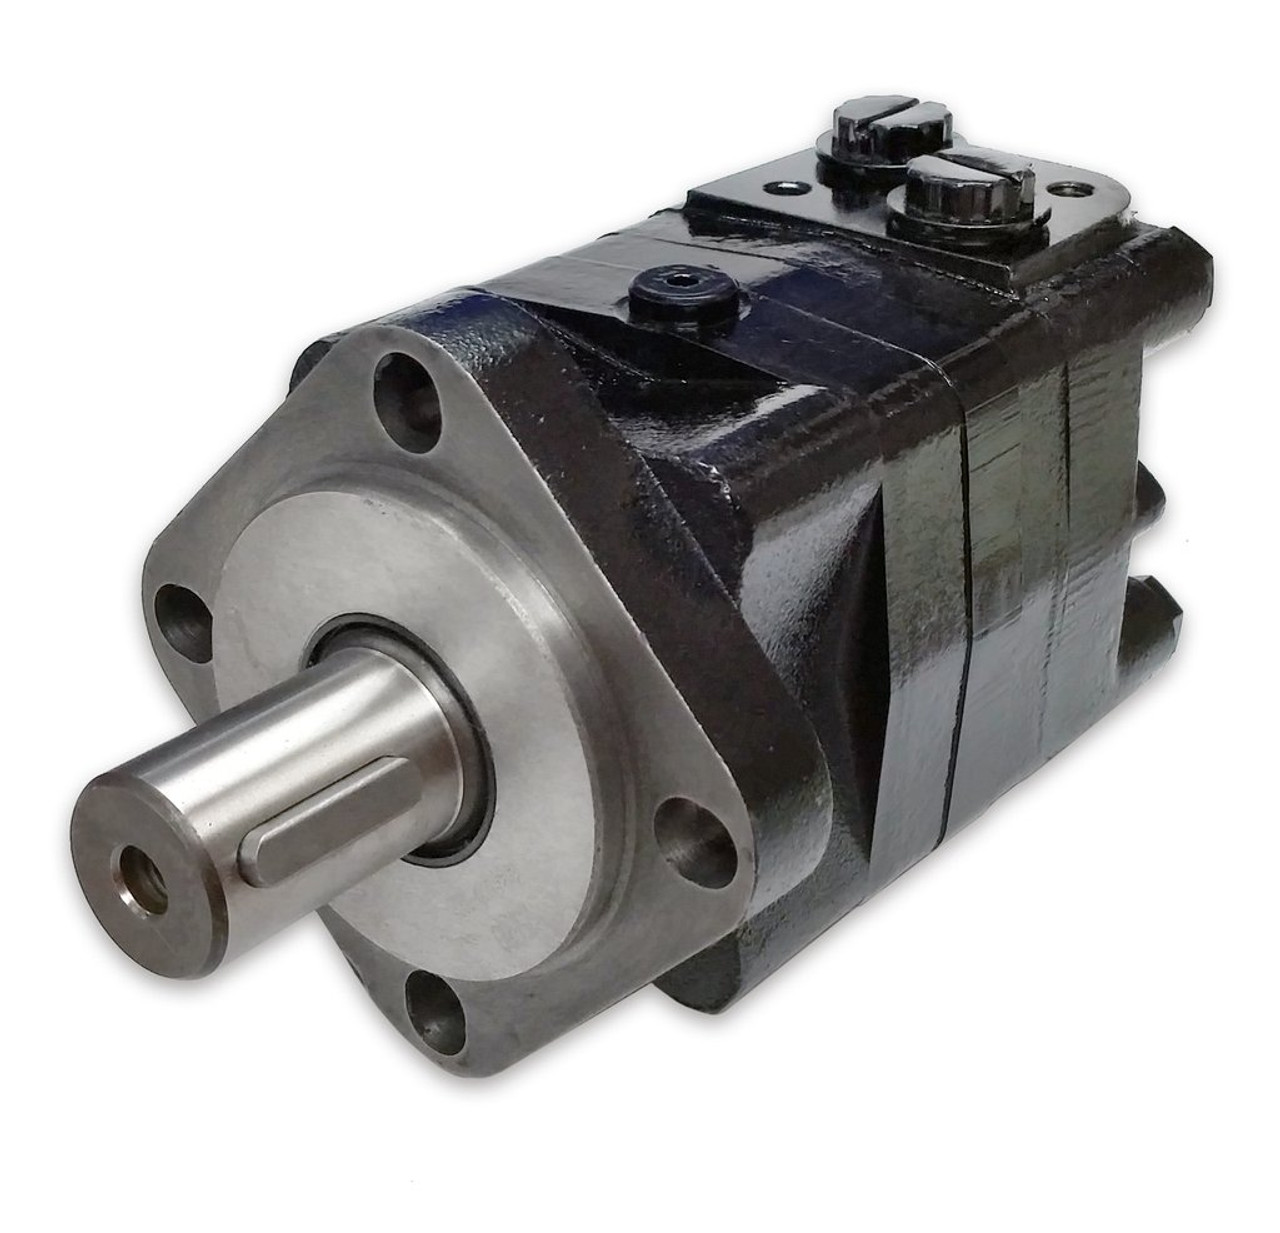 BMSY400E4KS BMSY-400-E4-K-S Hydraulic motor LSHT 24.04 cubic inch displacement  Dynamic Fluid Components